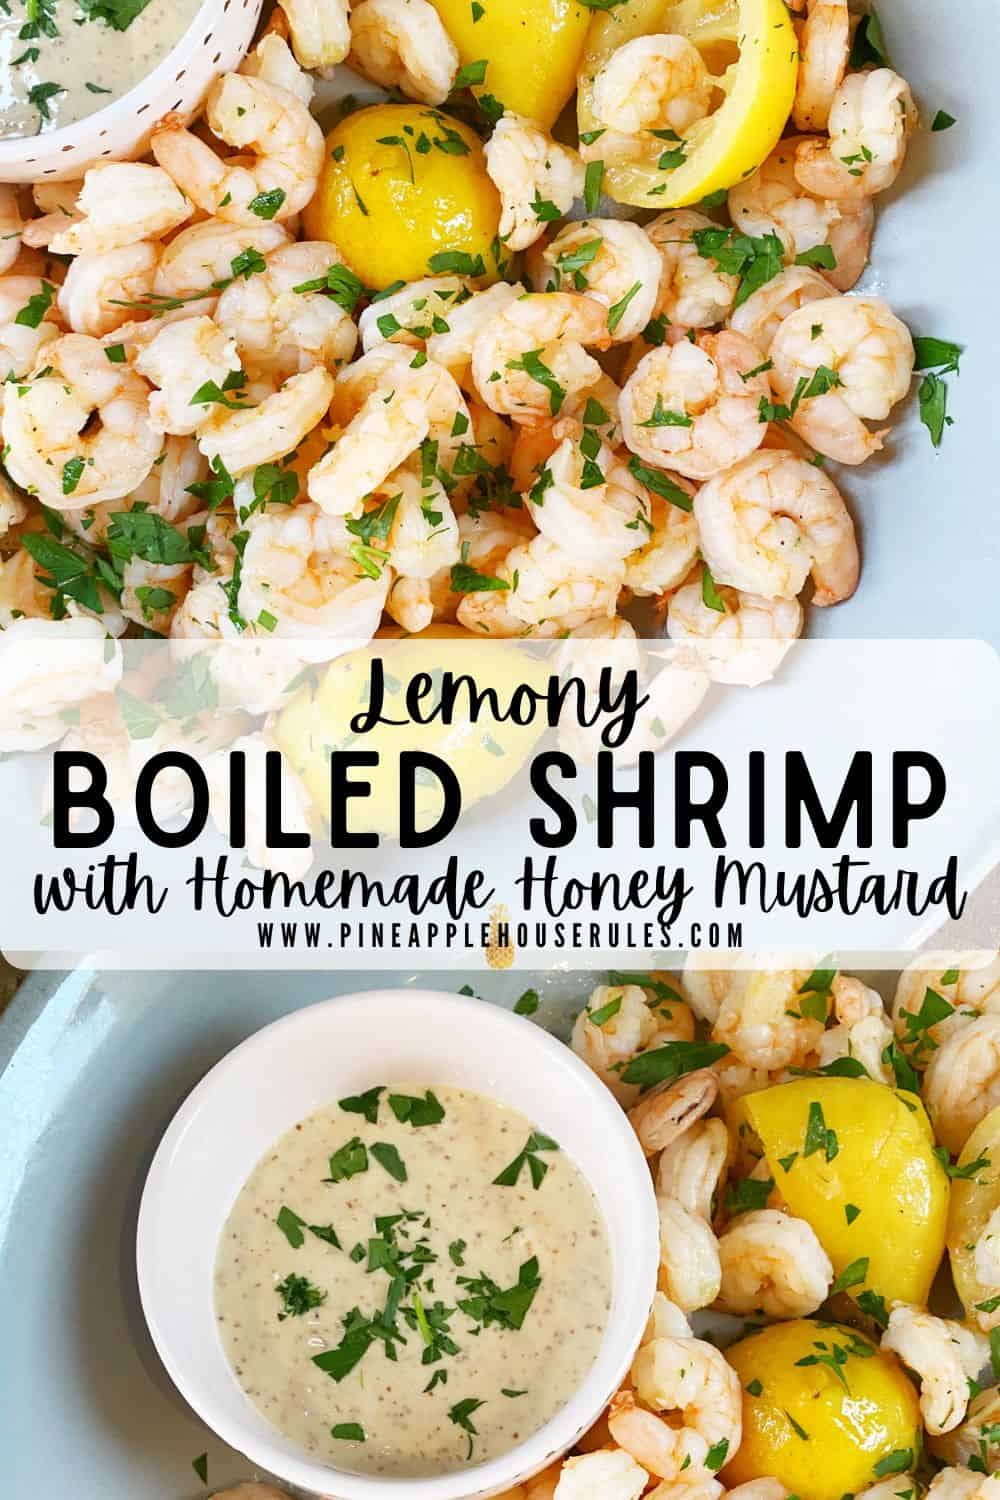 This Lemony Boiled Shrimp with Homemade Honey Mustard dipping sauce comes together in just minutes. All you need is some lemons, Creole seasoning, and shrimp! This meal comes together in under 10 minutes, too. Easy Dinner Recipes | Easy Dinner Recipes Healthy | Shrimp Boil | Shrimp Recipes | Shrimp Recipes Healthy | Shrimp Recipes for Dinner | Shrimp Recipes Easy | Shrimp Recipes for Dinner Easy | Dinner Recipes for Two | Dinner Recipes for Family | Fast Dinner Recipes | Quick Dinner Recipes